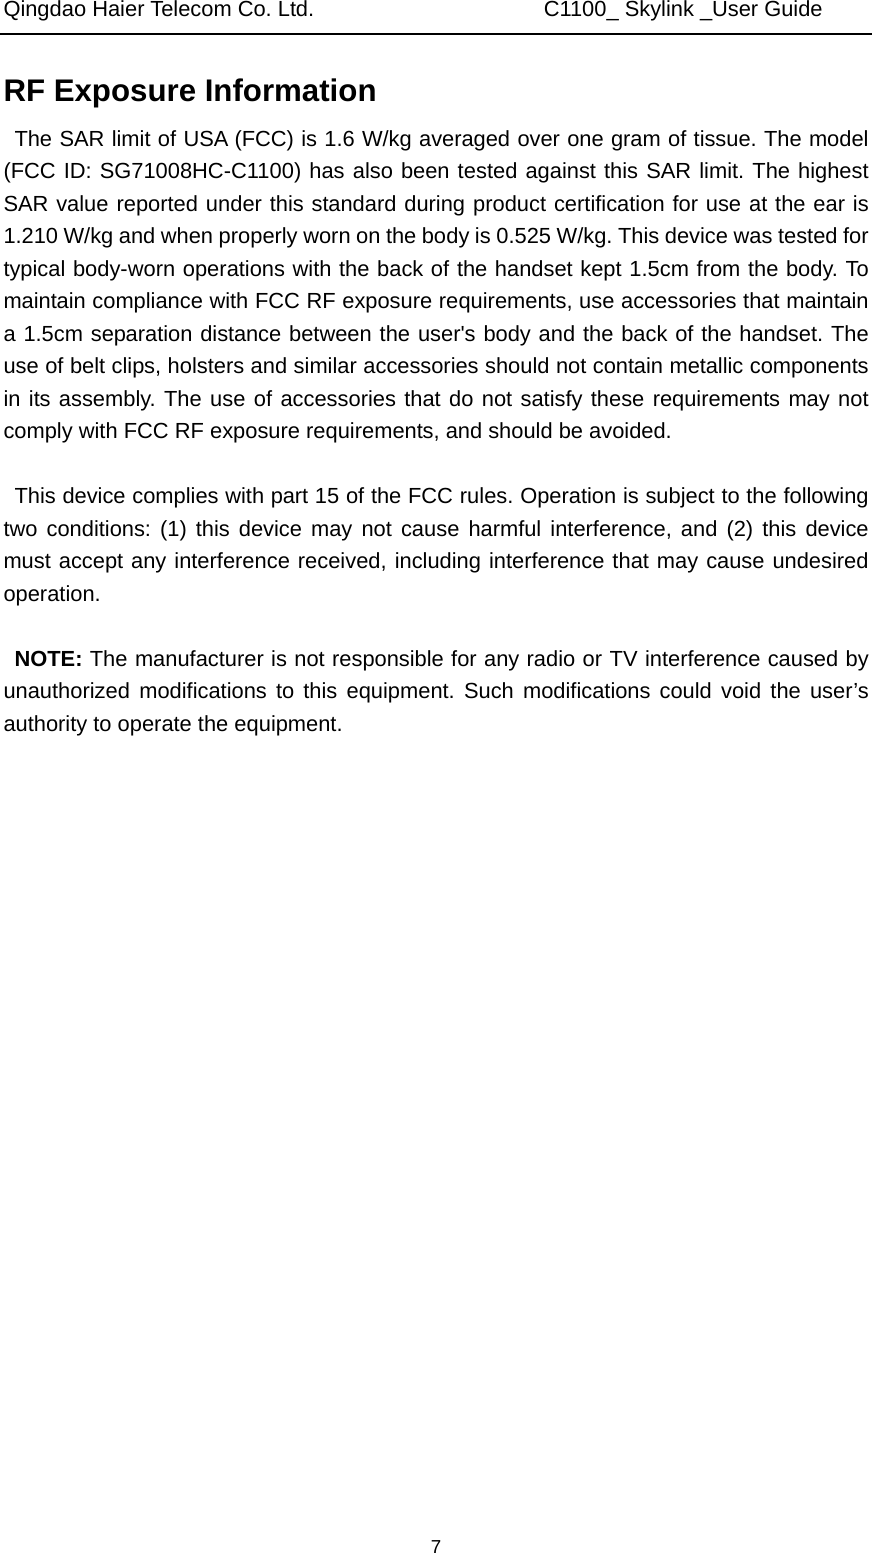 Qingdao Haier Telecom Co. Ltd.                     C1100_ Skylink _User Guide  7RF Exposure Information   The SAR limit of USA (FCC) is 1.6 W/kg averaged over one gram of tissue. The model (FCC ID: SG71008HC-C1100) has also been tested against this SAR limit. The highest SAR value reported under this standard during product certification for use at the ear is 1.210 W/kg and when properly worn on the body is 0.525 W/kg. This device was tested for typical body-worn operations with the back of the handset kept 1.5cm from the body. To maintain compliance with FCC RF exposure requirements, use accessories that maintain a 1.5cm separation distance between the user&apos;s body and the back of the handset. The use of belt clips, holsters and similar accessories should not contain metallic components in its assembly. The use of accessories that do not satisfy these requirements may not comply with FCC RF exposure requirements, and should be avoided.  This device complies with part 15 of the FCC rules. Operation is subject to the following two conditions: (1) this device may not cause harmful interference, and (2) this device must accept any interference received, including interference that may cause undesired operation.  NOTE: The manufacturer is not responsible for any radio or TV interference caused by unauthorized modifications to this equipment. Such modifications could void the user’s authority to operate the equipment.  